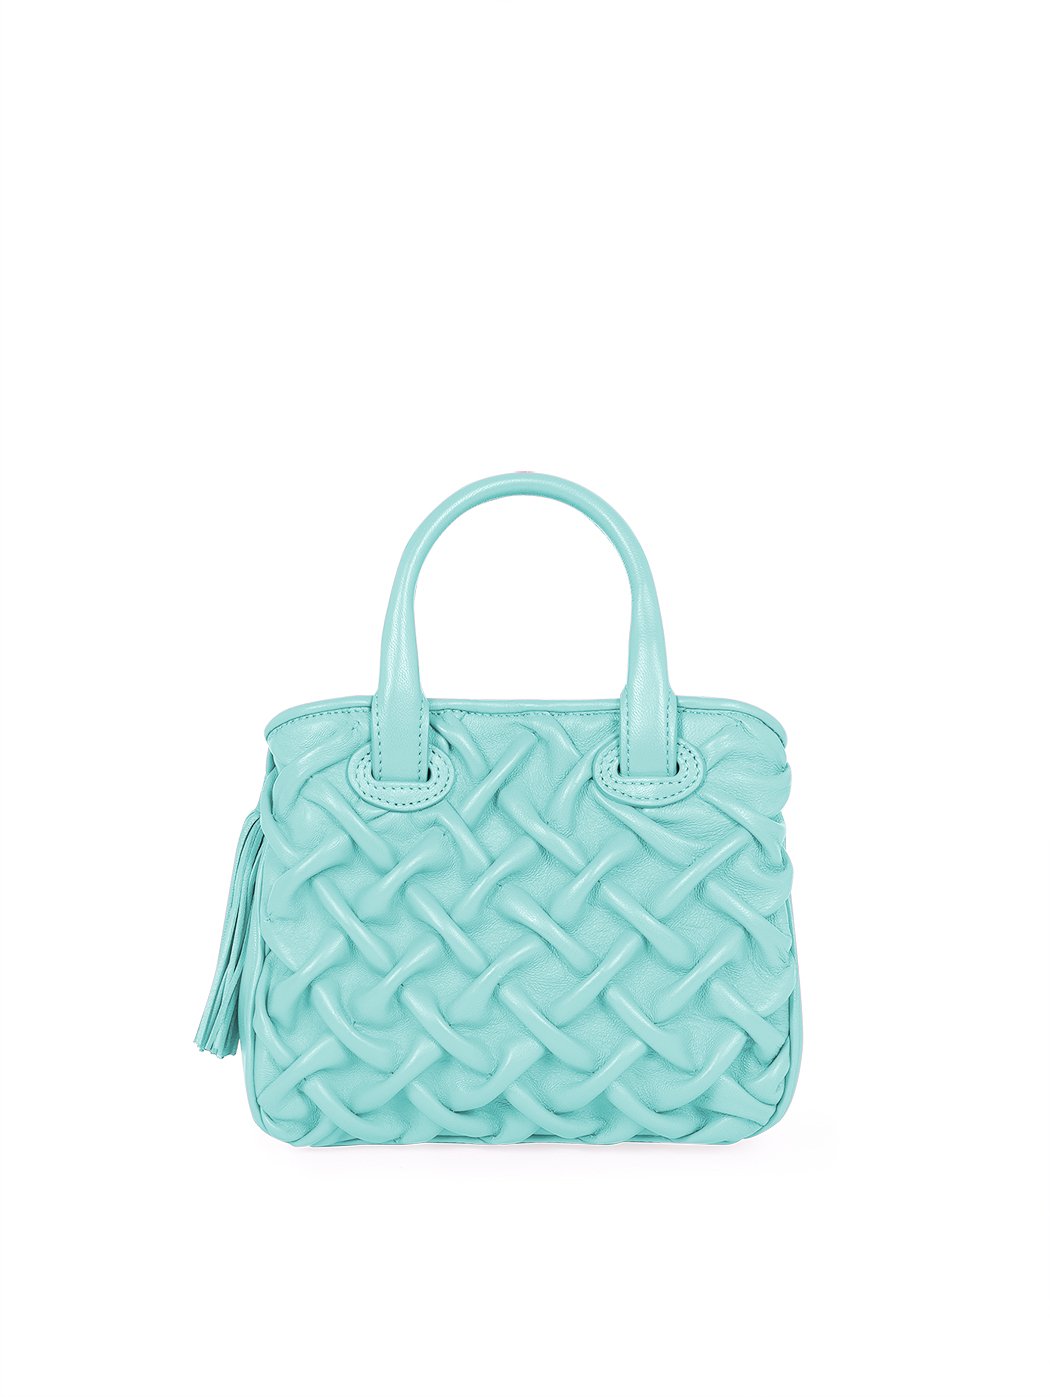 Convertible Top Handle Quilted Weave Leather Crossbody Aqua Blue